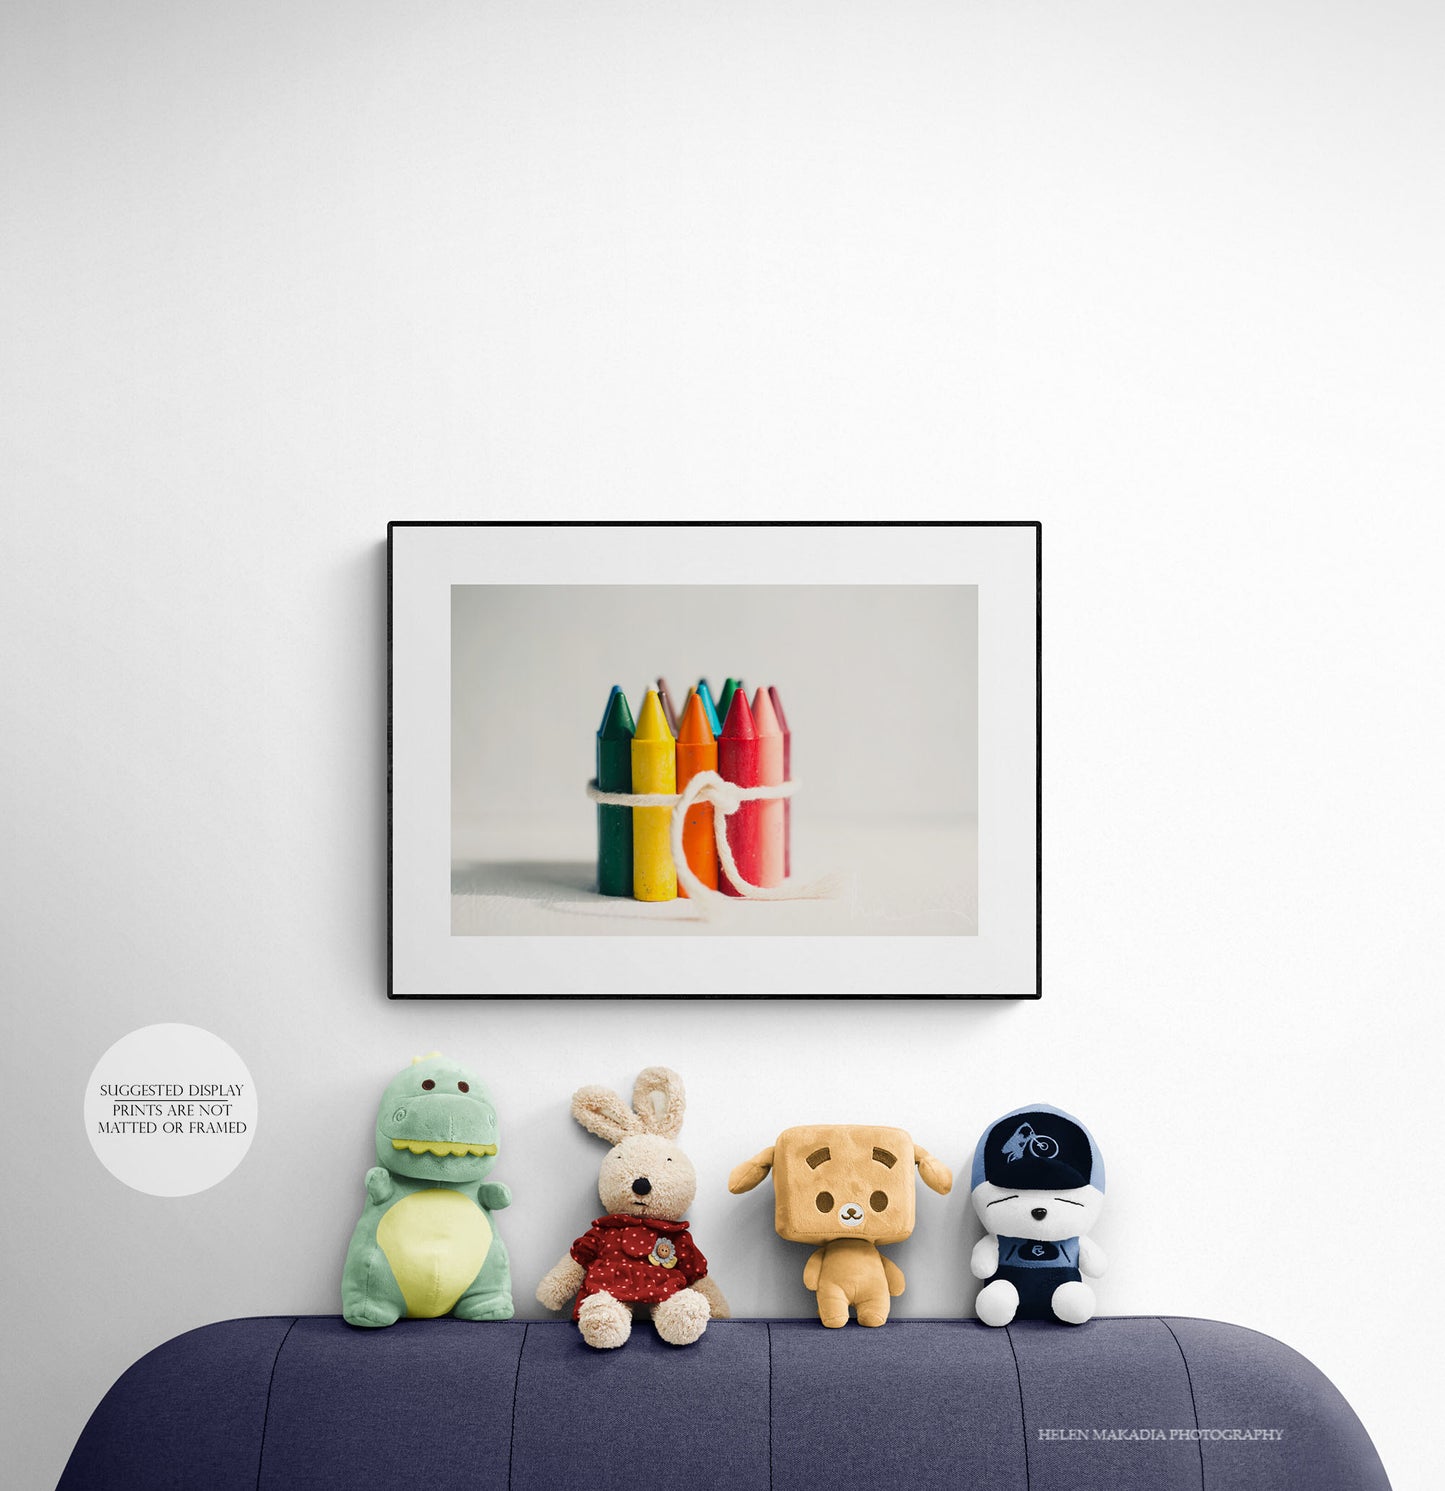 A framed photograph of a group of rainbow crayons, as wall art in a kid's room